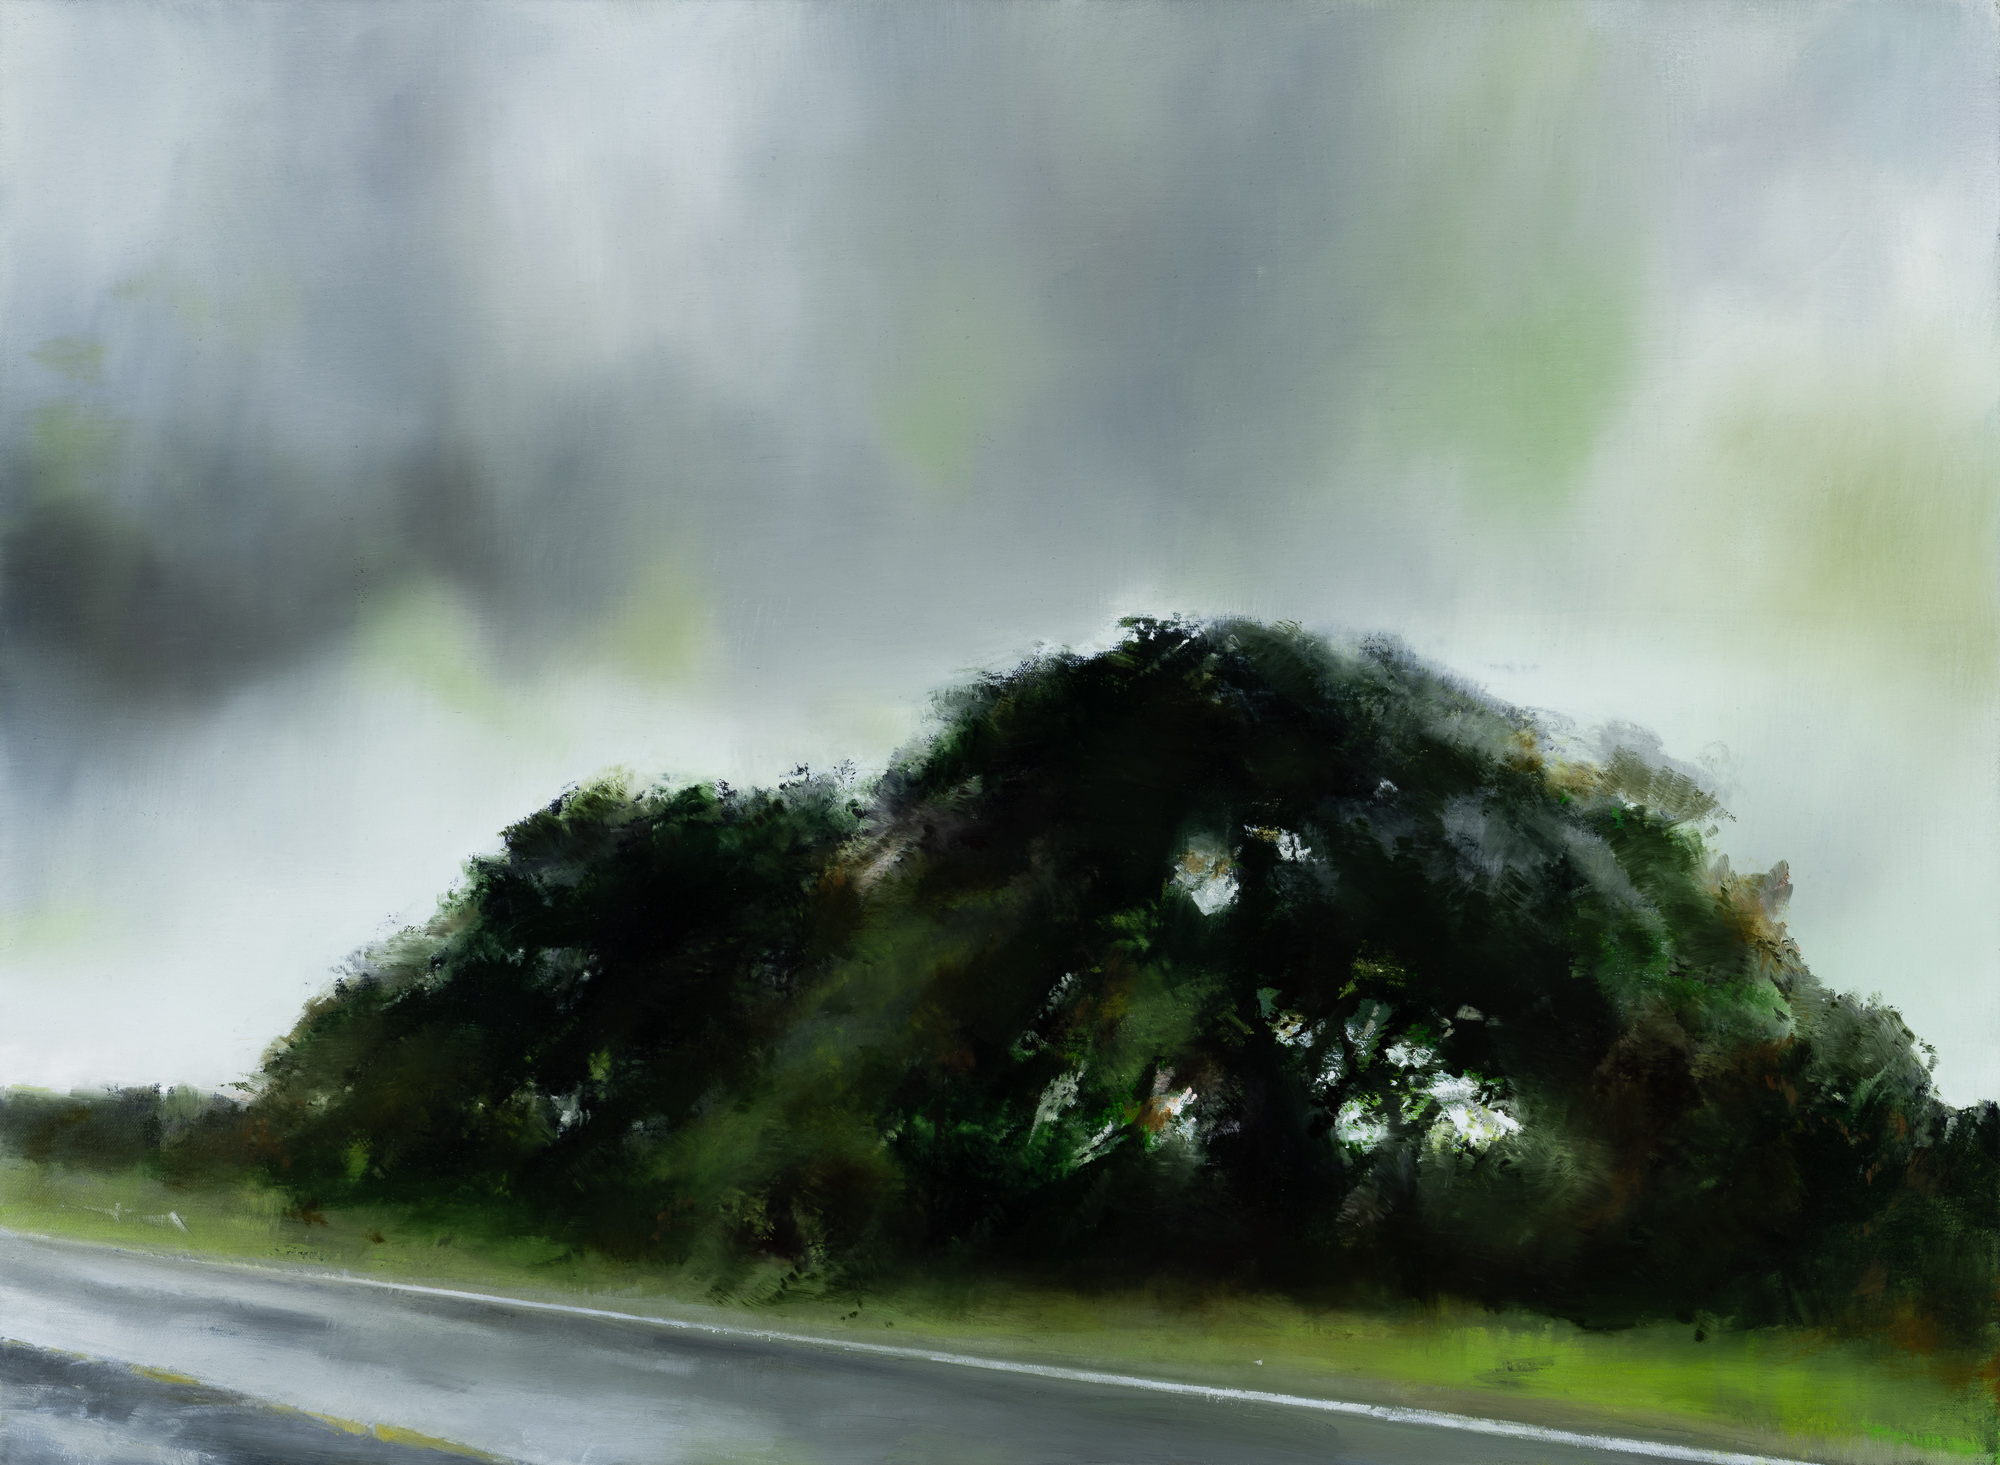   tree storm road  •  22" x 30"  oil on canvas  2019     